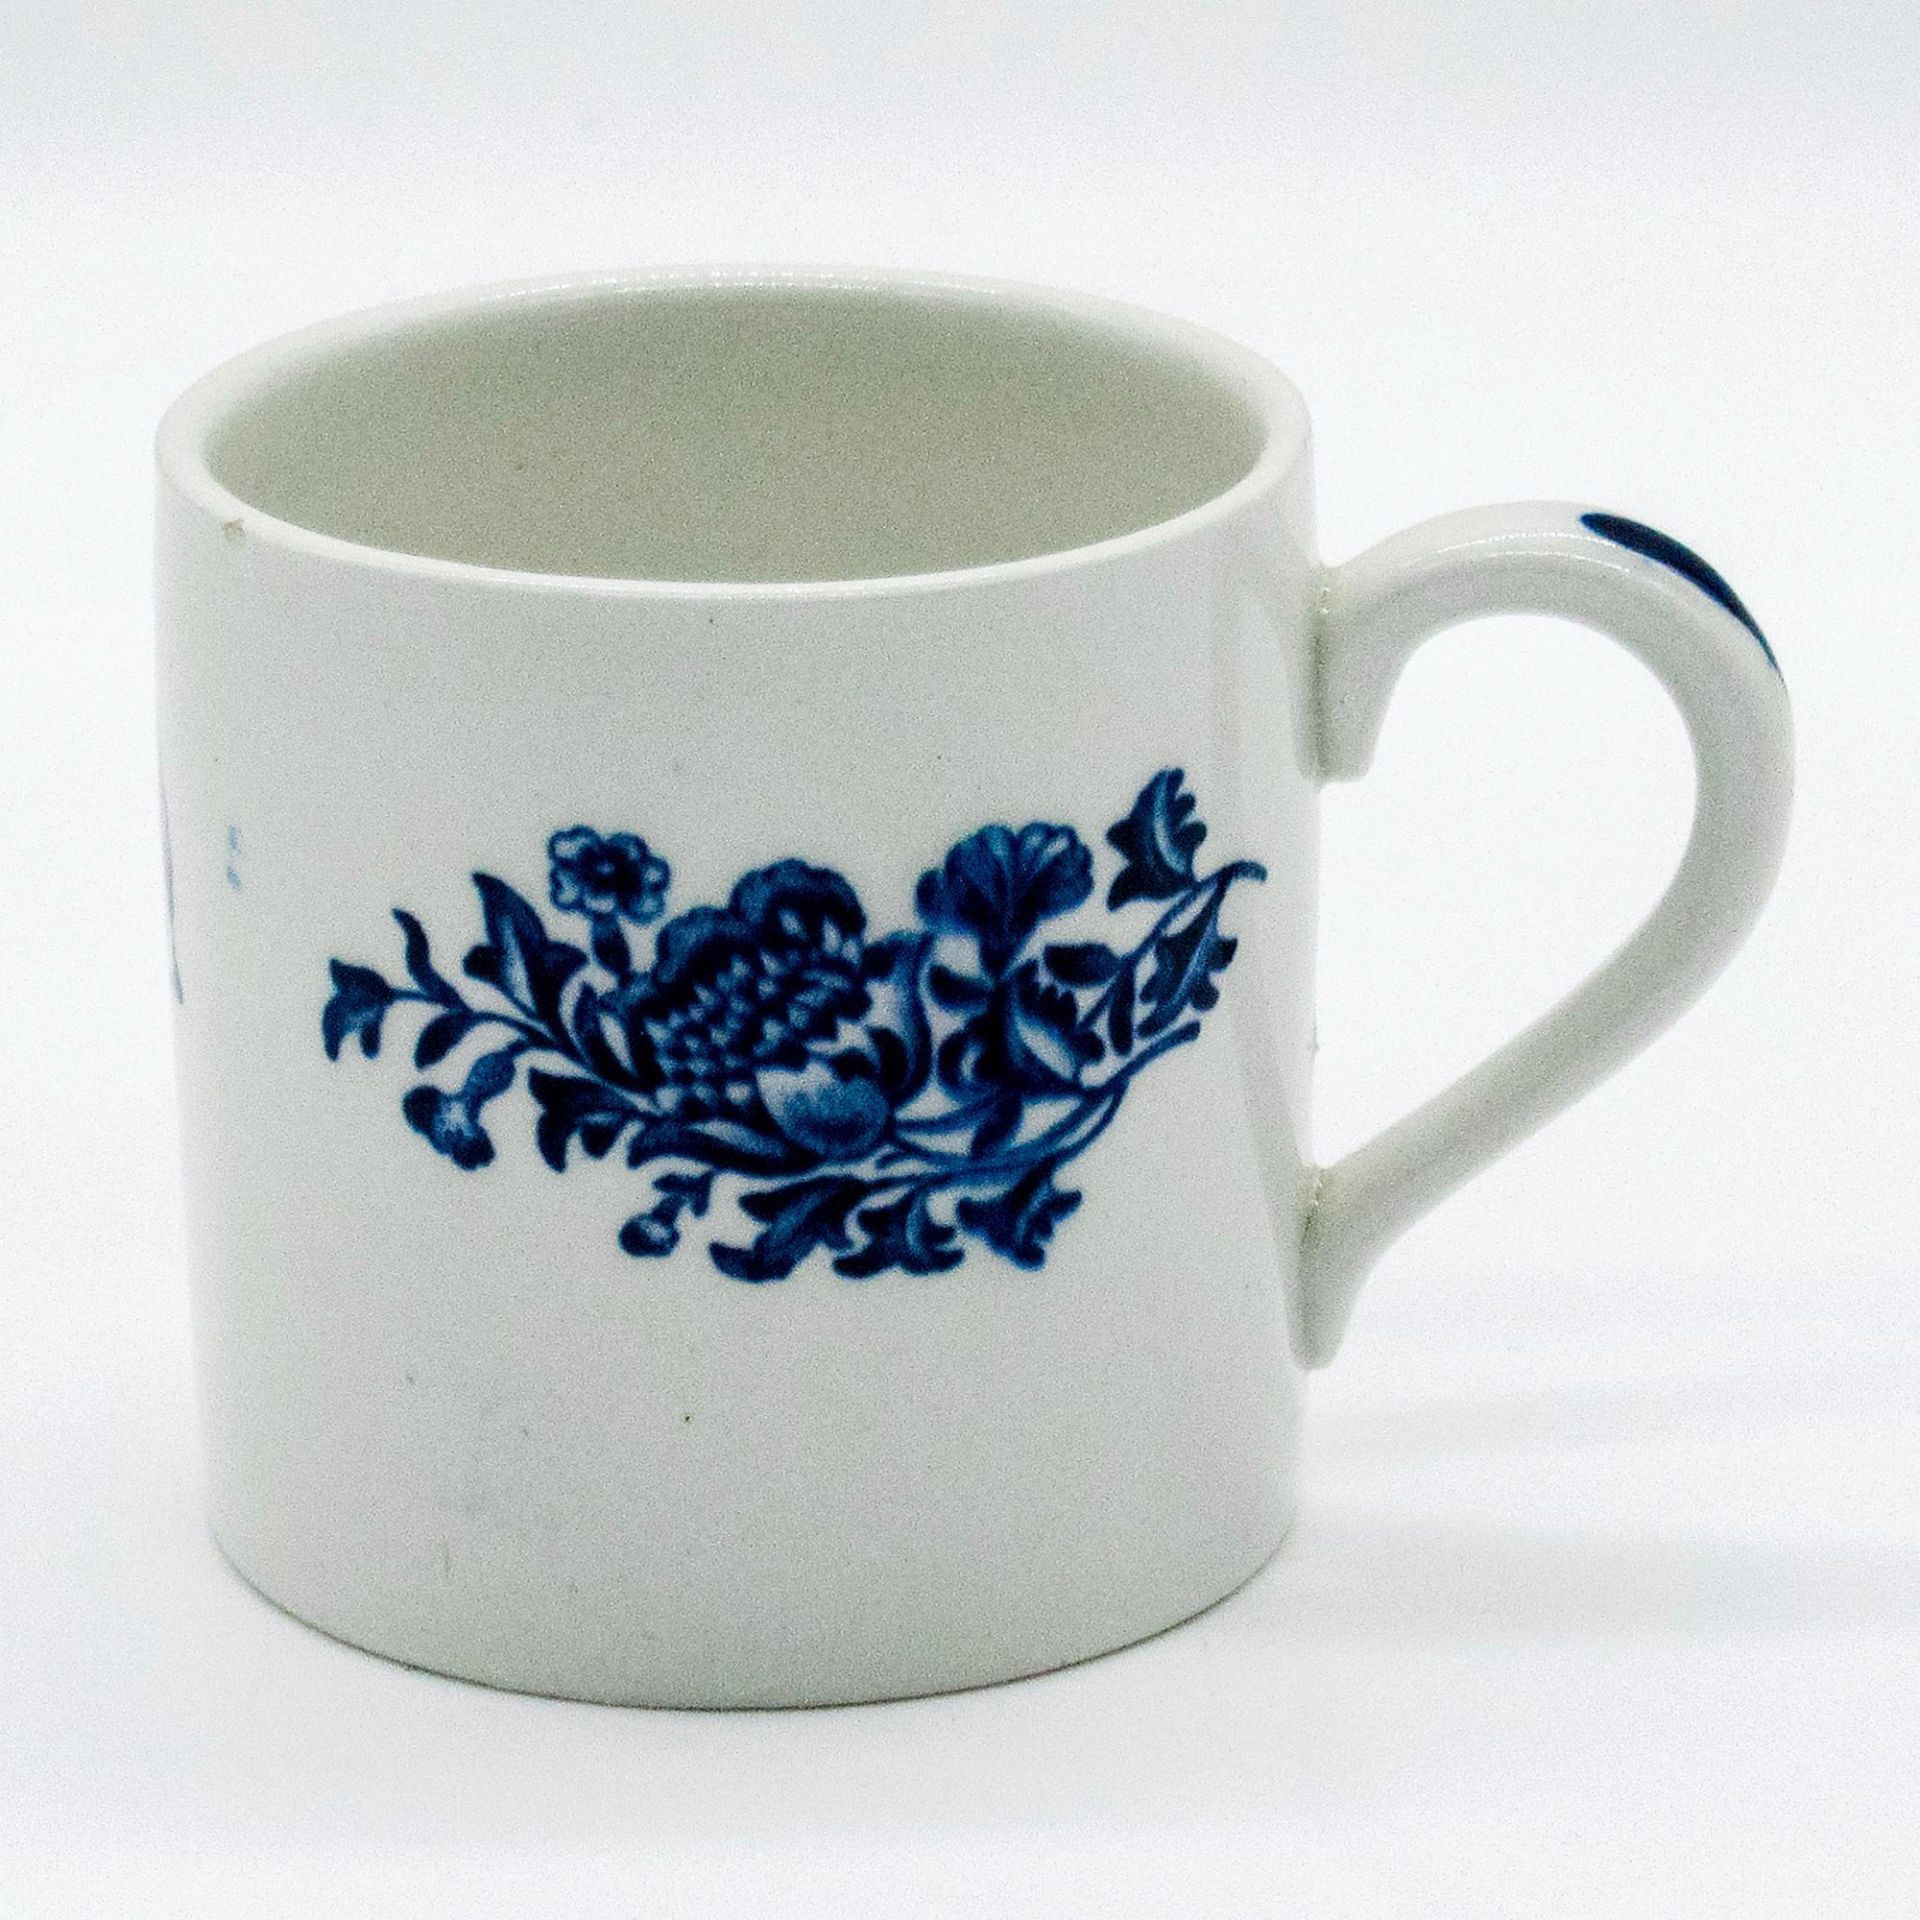 Vintage Booths Espresso Cup, Peony A8021 - Image 2 of 5